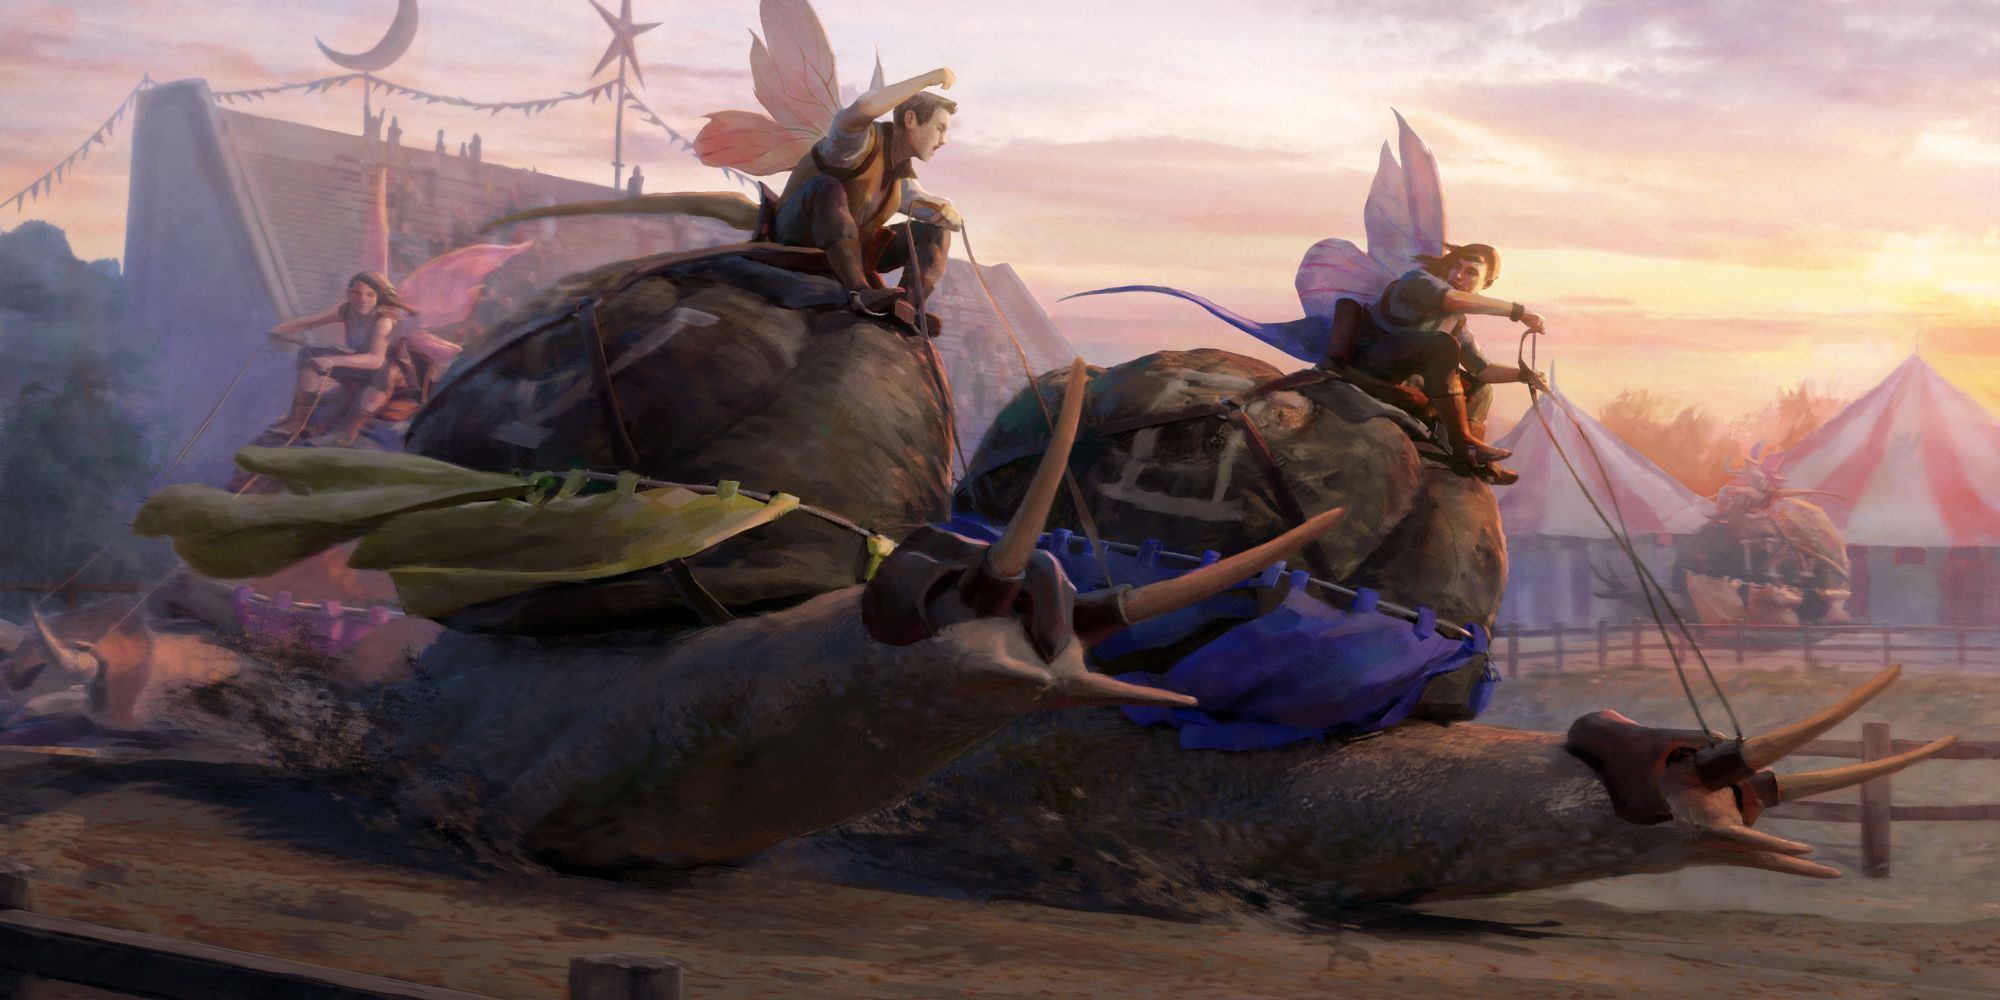 Dungeons And Dragons - Wild Beyond The Witchlight artwork of two people racing giant snails